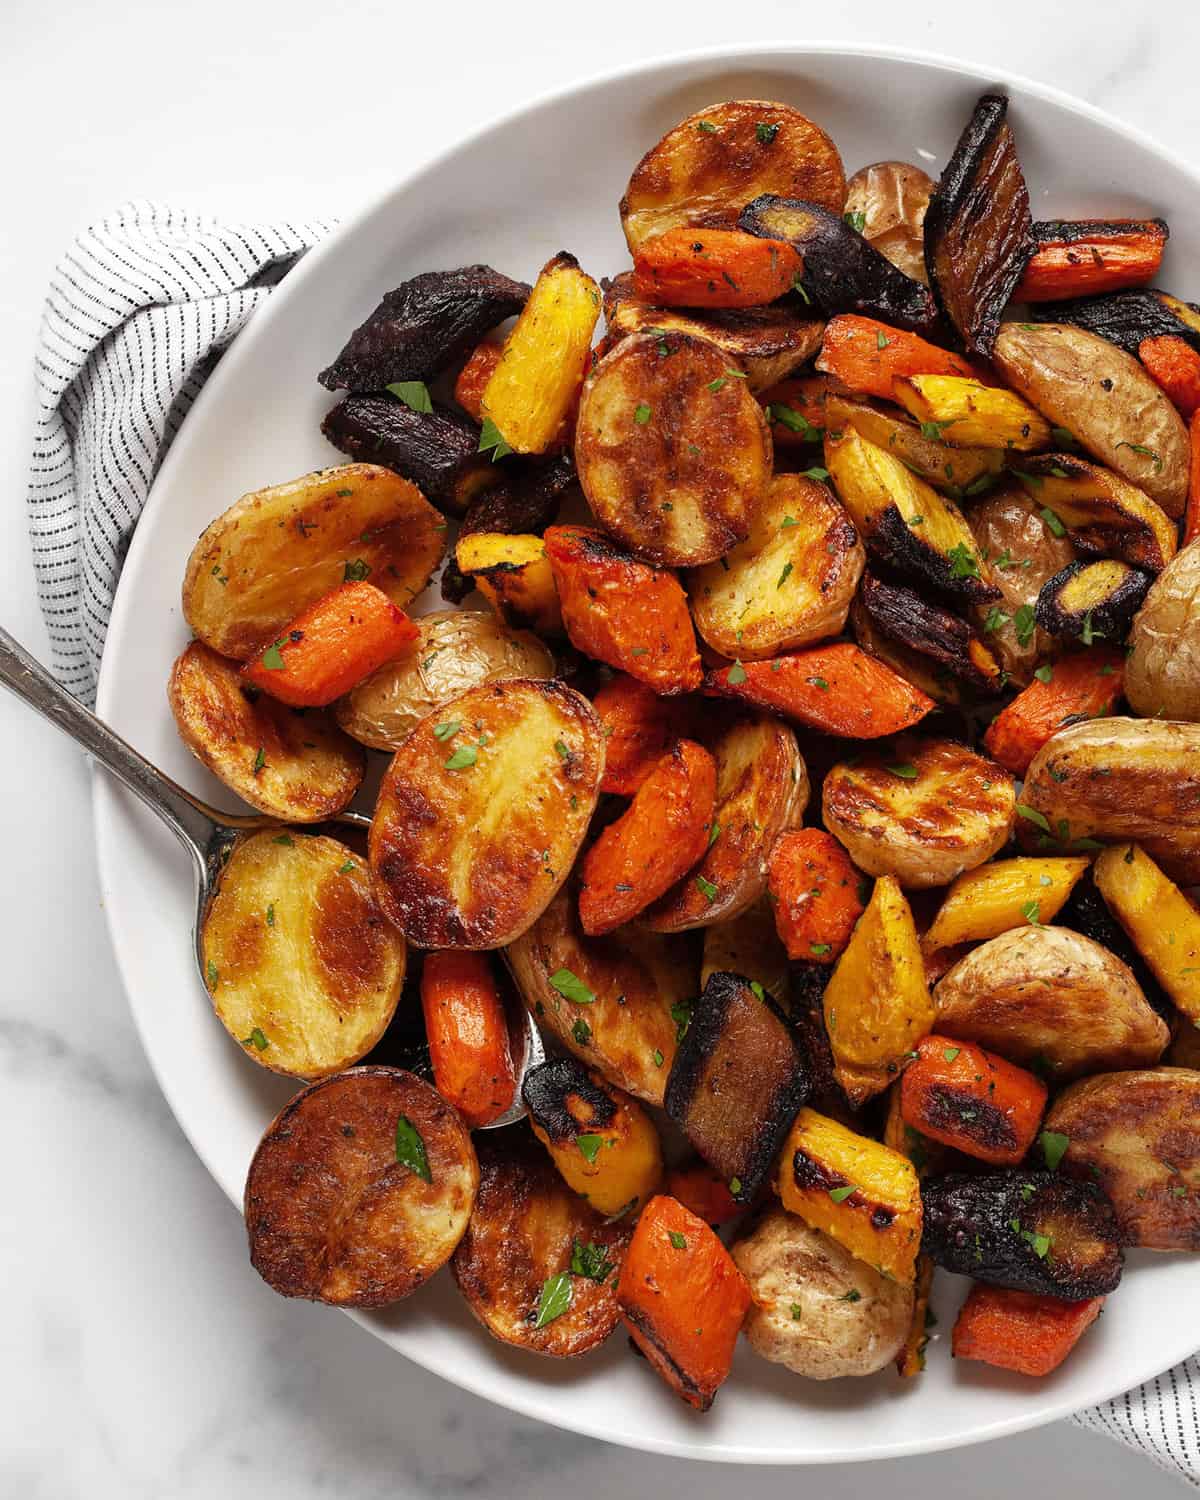 Roasted carrots and potatoes on a plate.